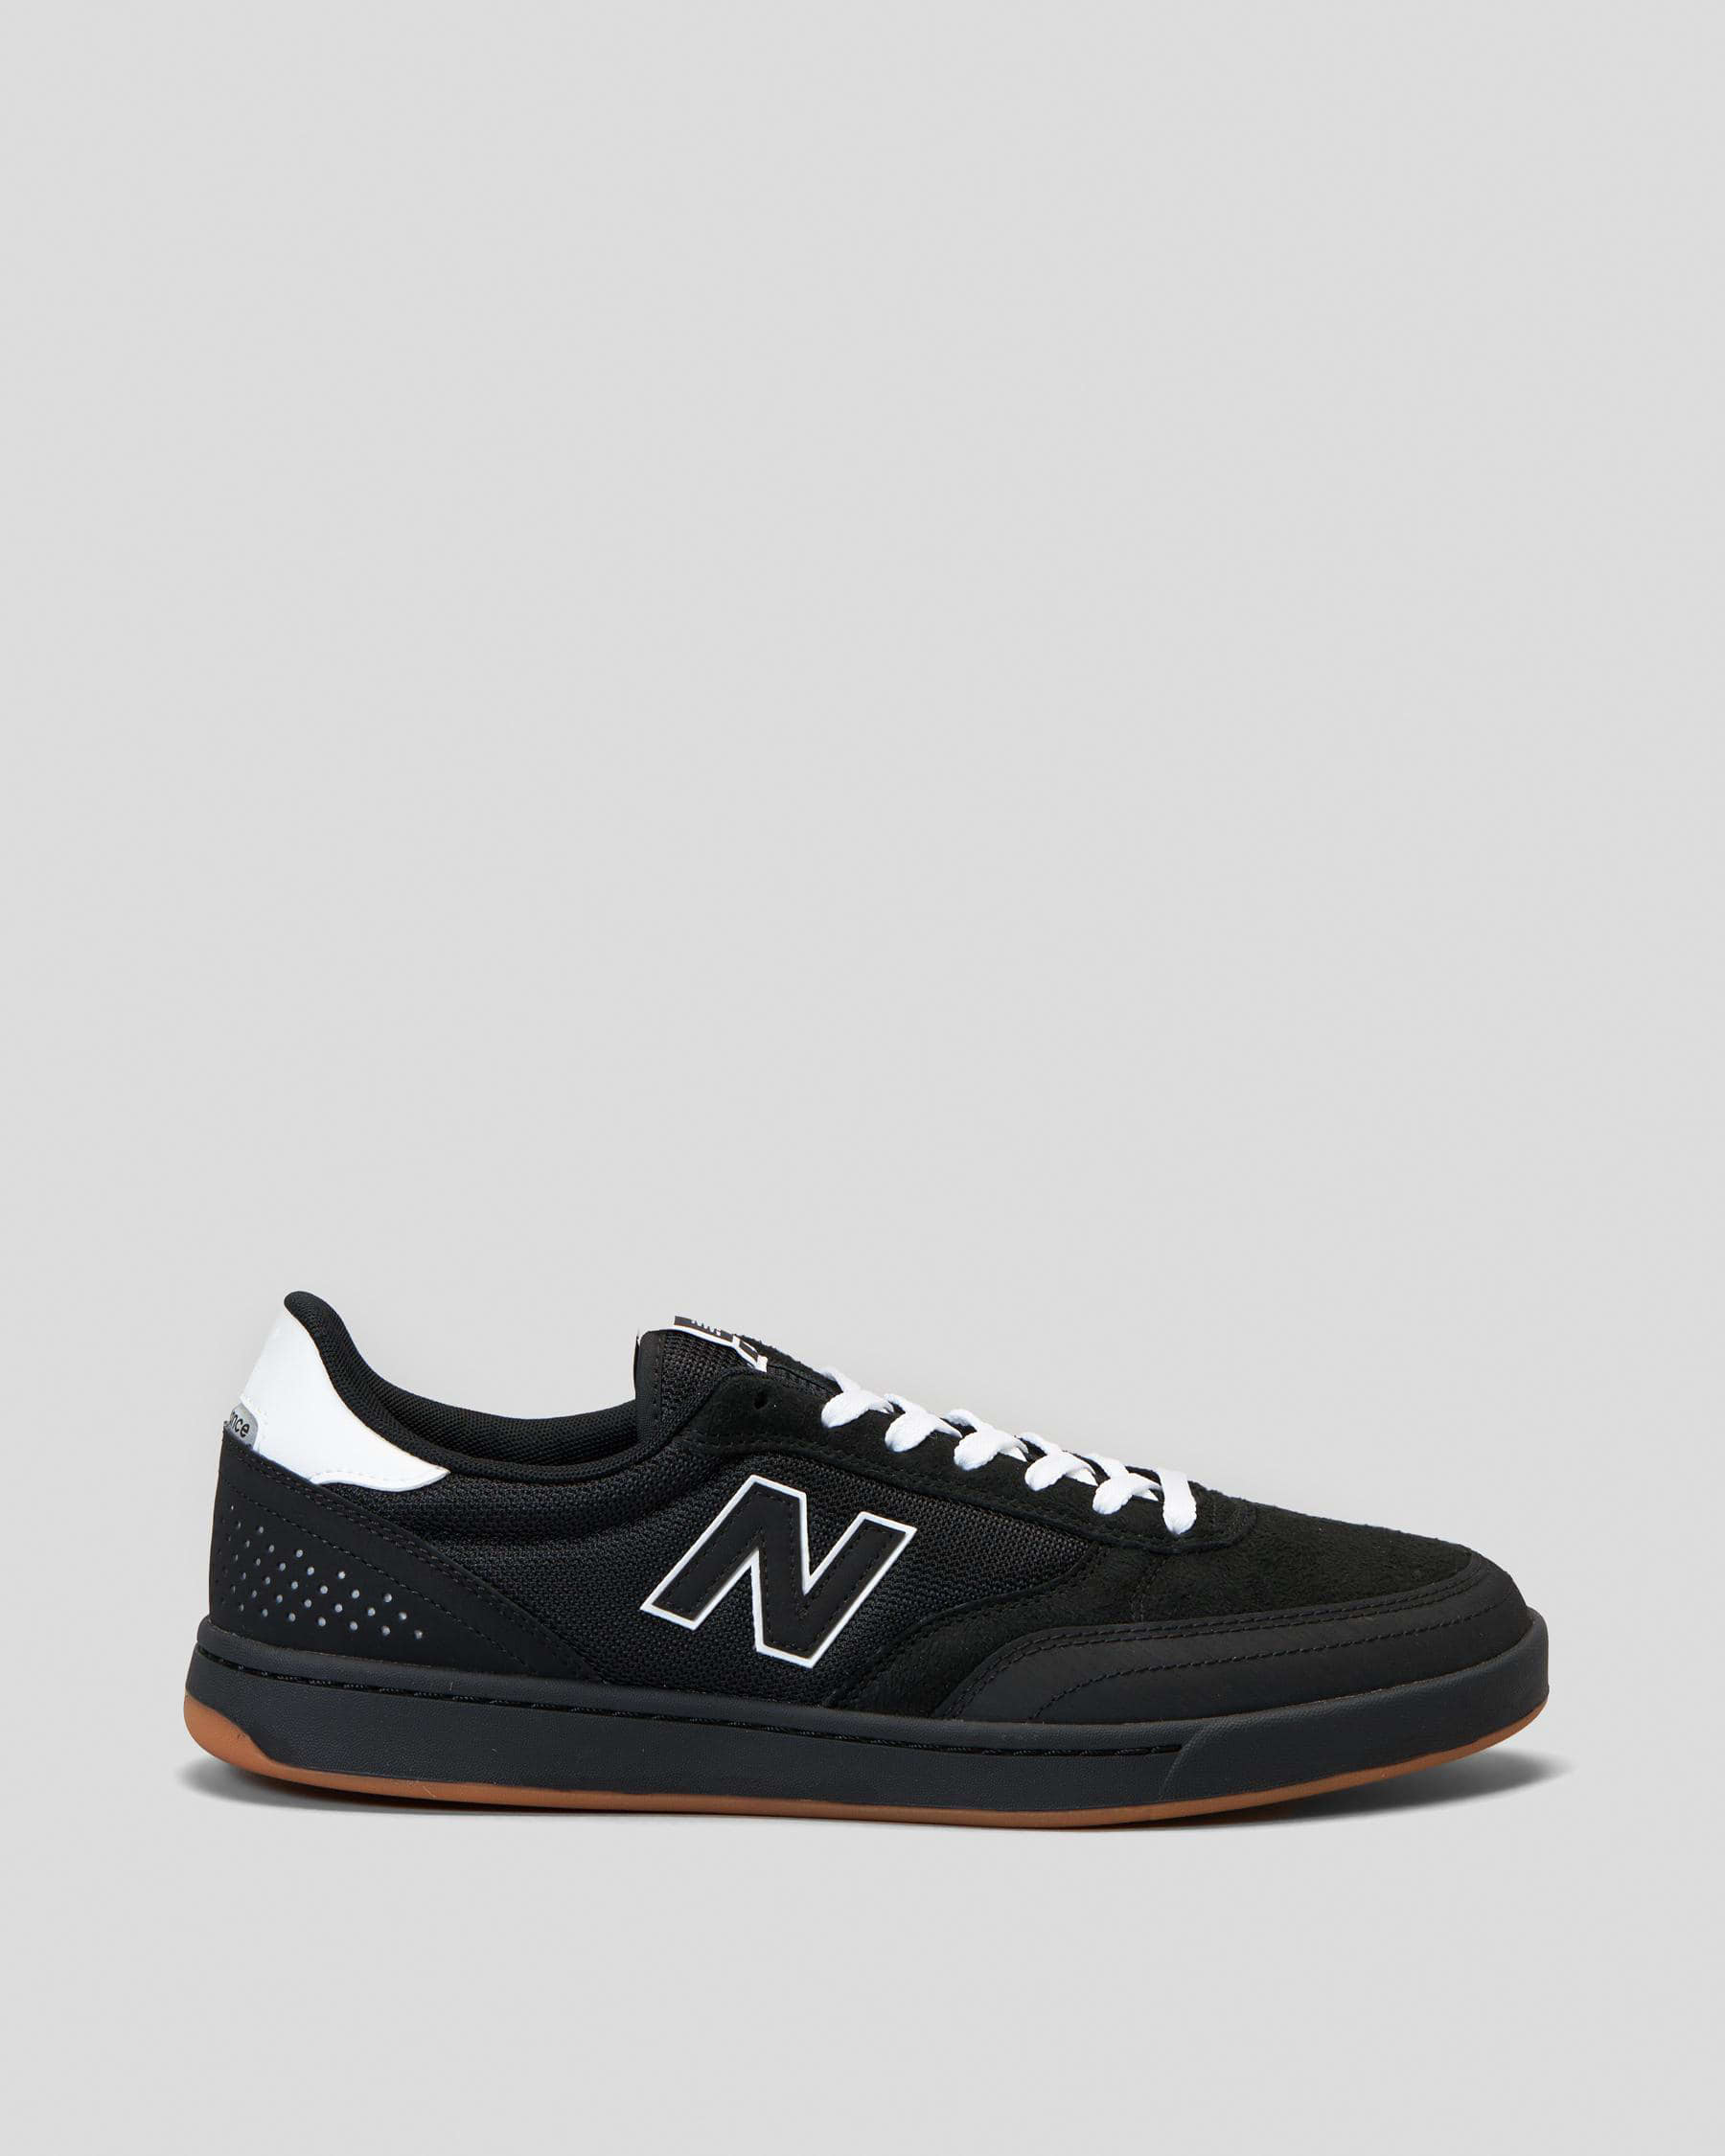 New Balance Nb 440 Shoes In Black/white - Fast Shipping & Easy Returns ...